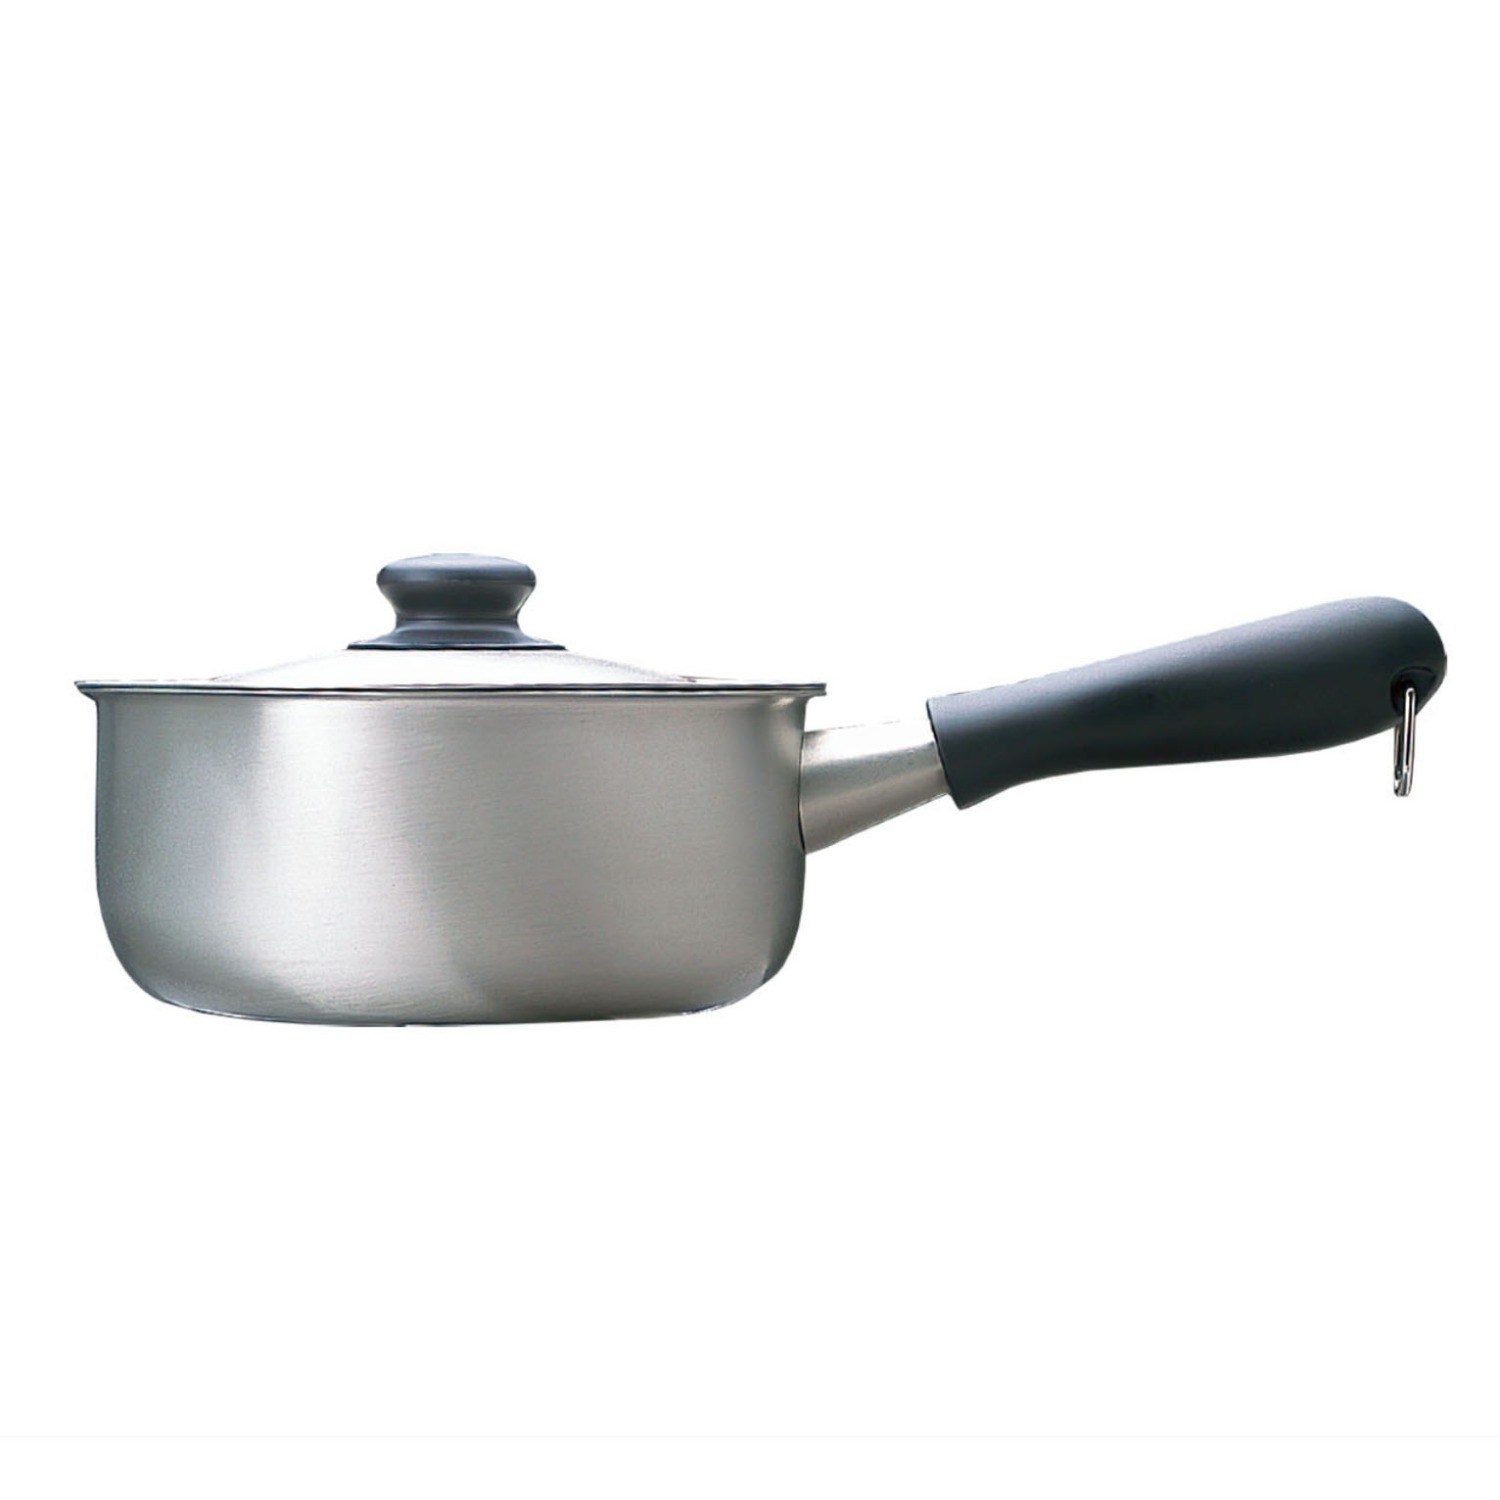 ﻿18cm Stainless Steel One-handled Pan